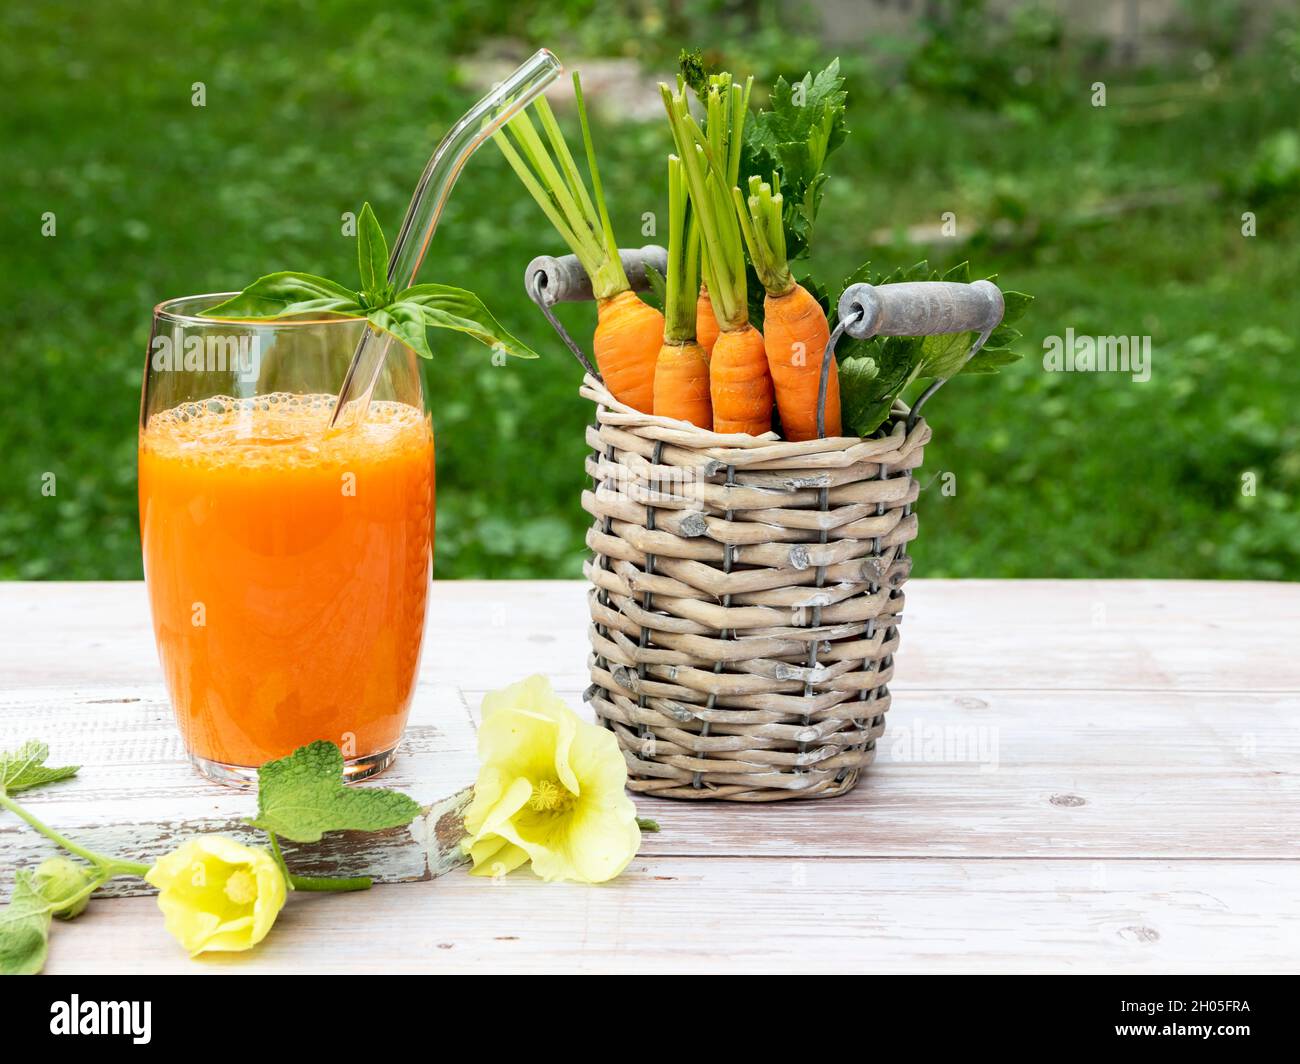 Fresh squeezed carrot juice in a glass on a wooden surface, rustic style Healthy eating, detox, dieting and vegetarian concept. Stock Photo